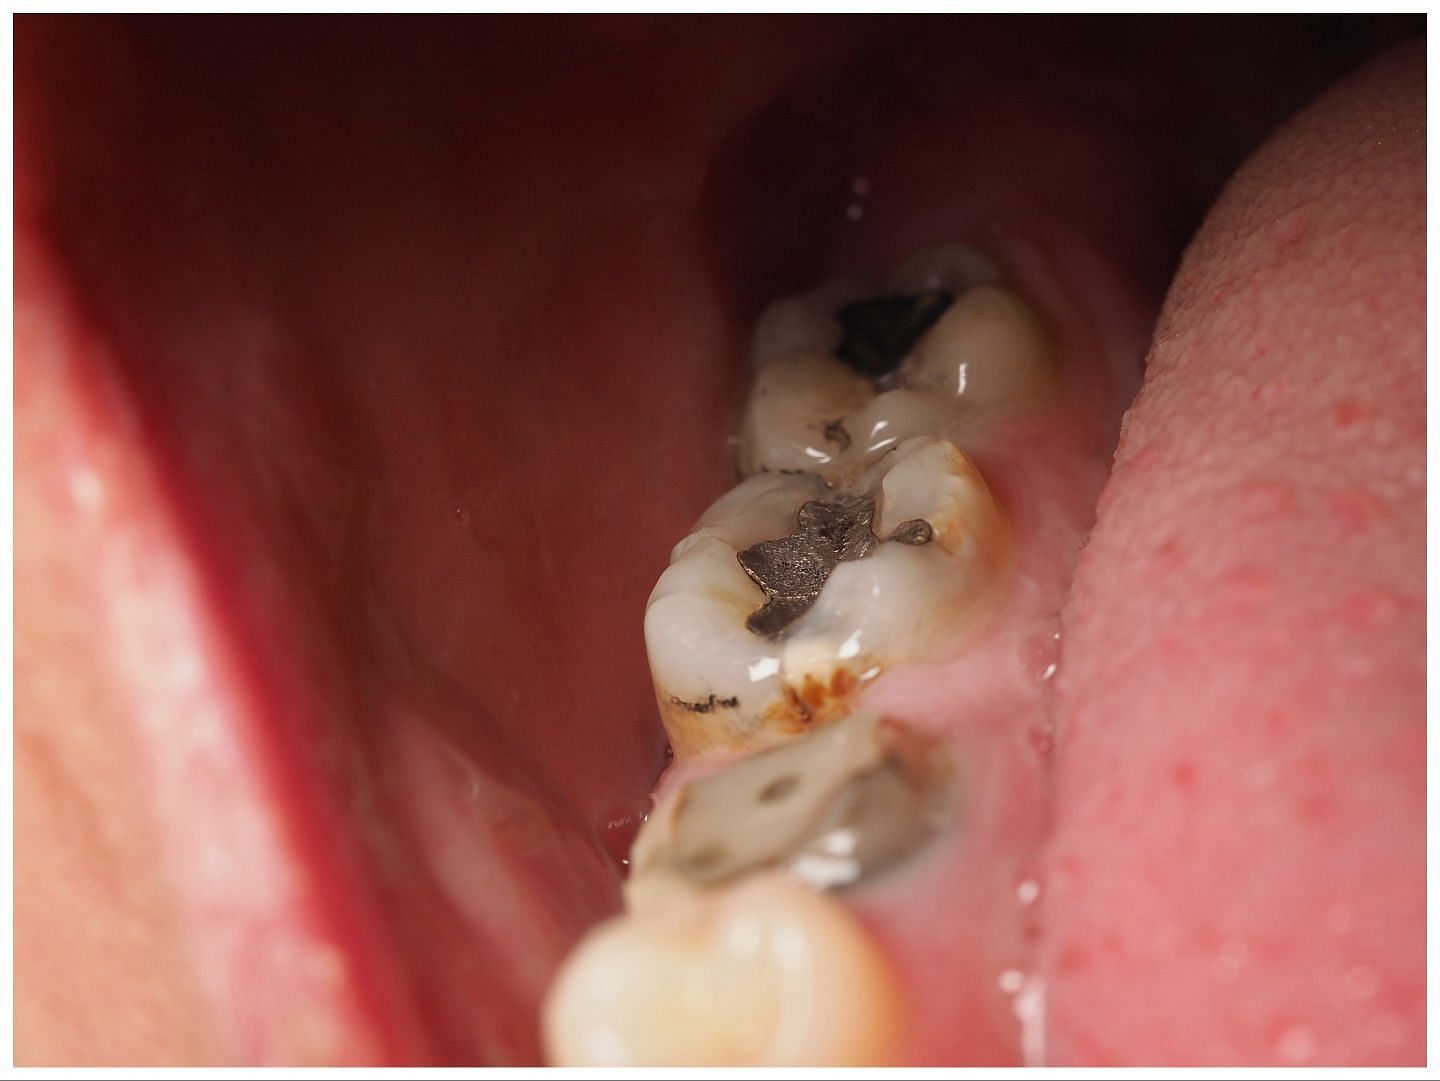 Drinking soda can cause cavities (Image via Vecteezy)